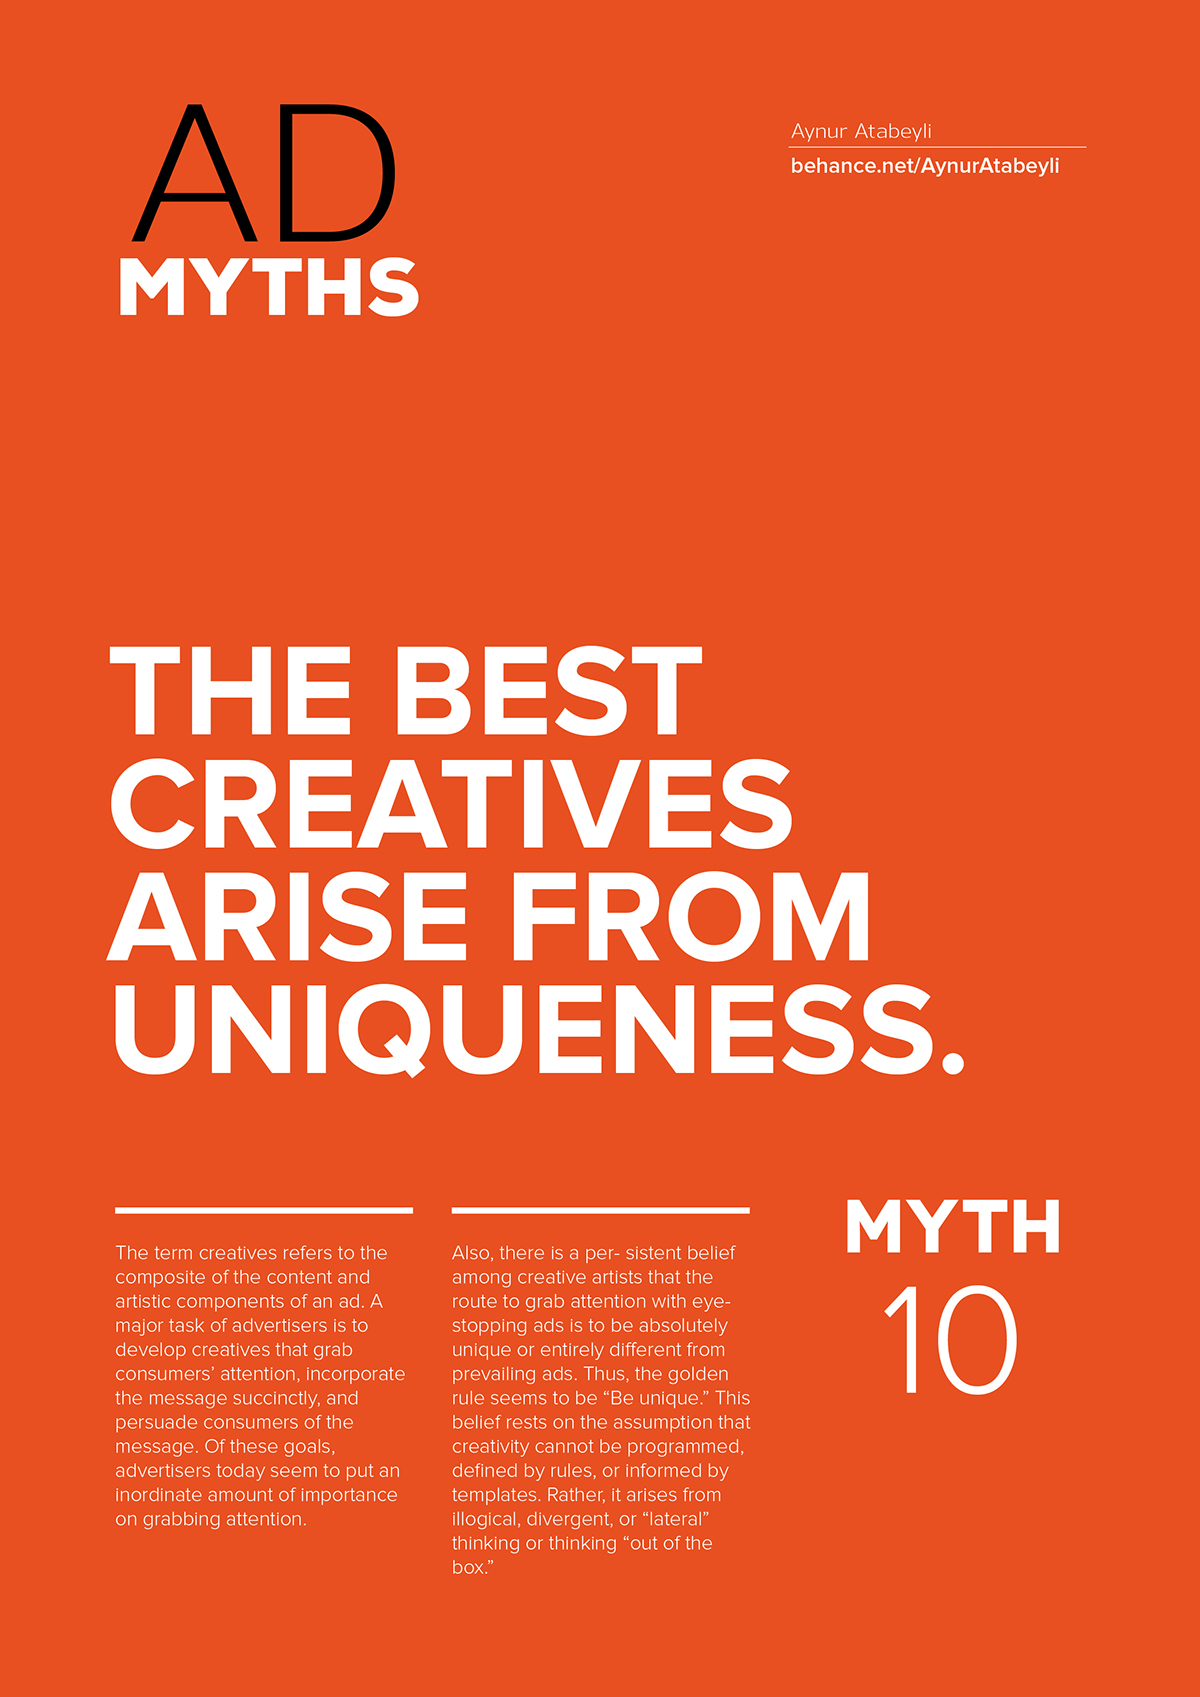 Advertising  myths posters design Illustrator theory ads